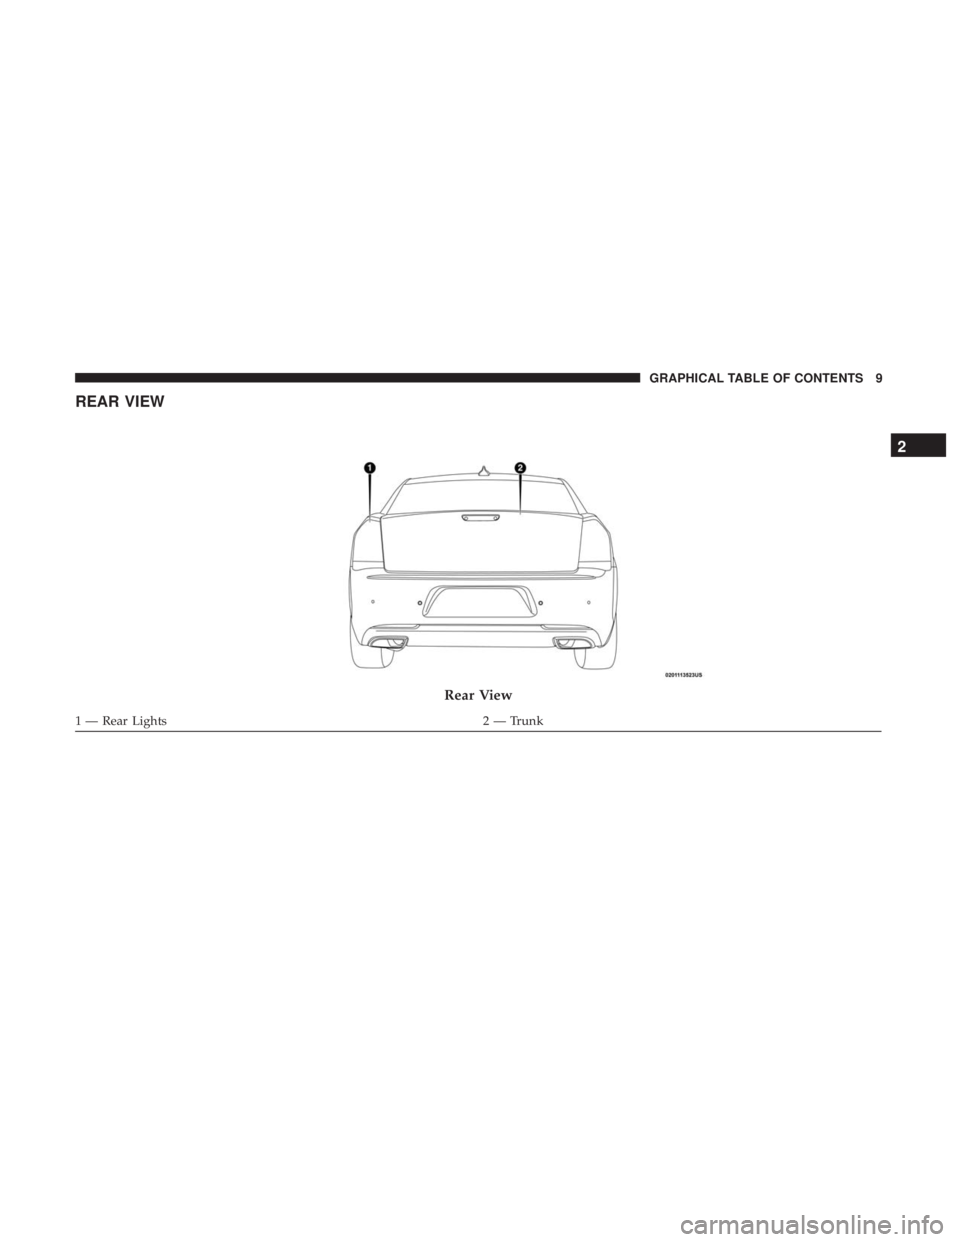 CHRYSLER 300 2018  Owners Manual REAR VIEW
Rear View
1 — Rear Lights2 — Trunk
2
GRAPHICAL TABLE OF CONTENTS 9 